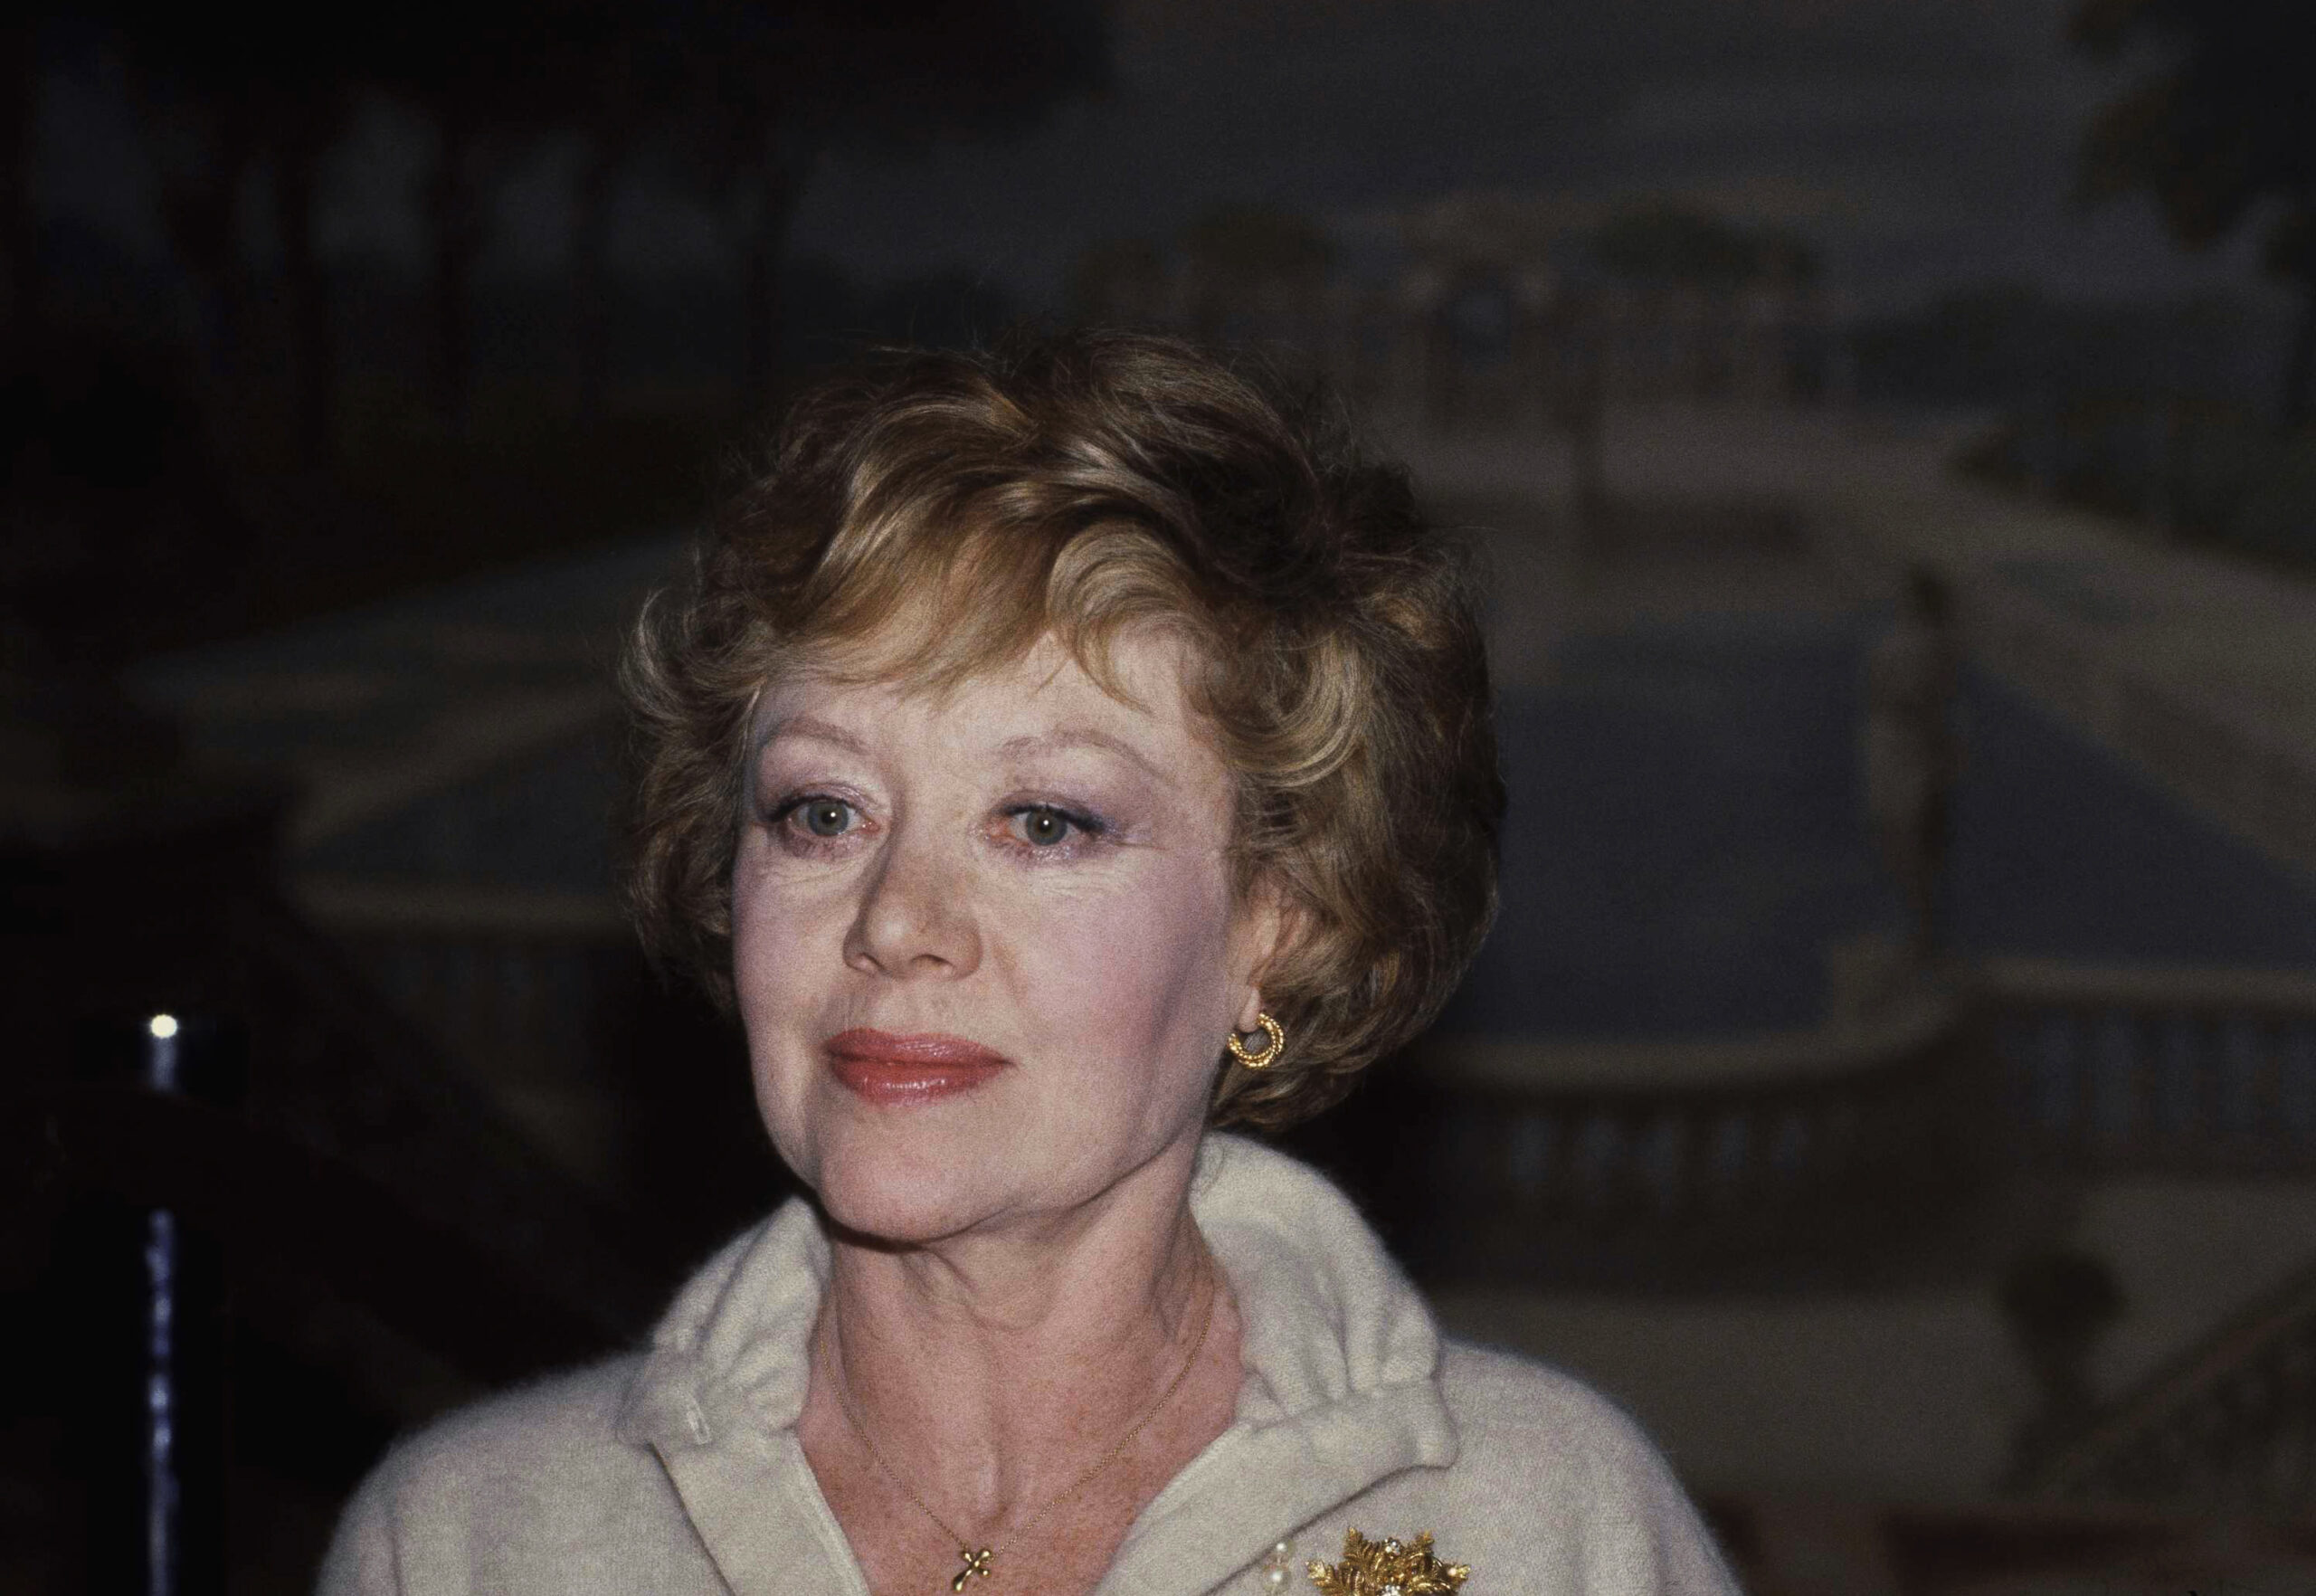 CORRECTS DAY OF DEATH TO JAN. 4 - FILE - Actress Glynis Johns is shown, Sept. 11, 1982. Johns, a To...